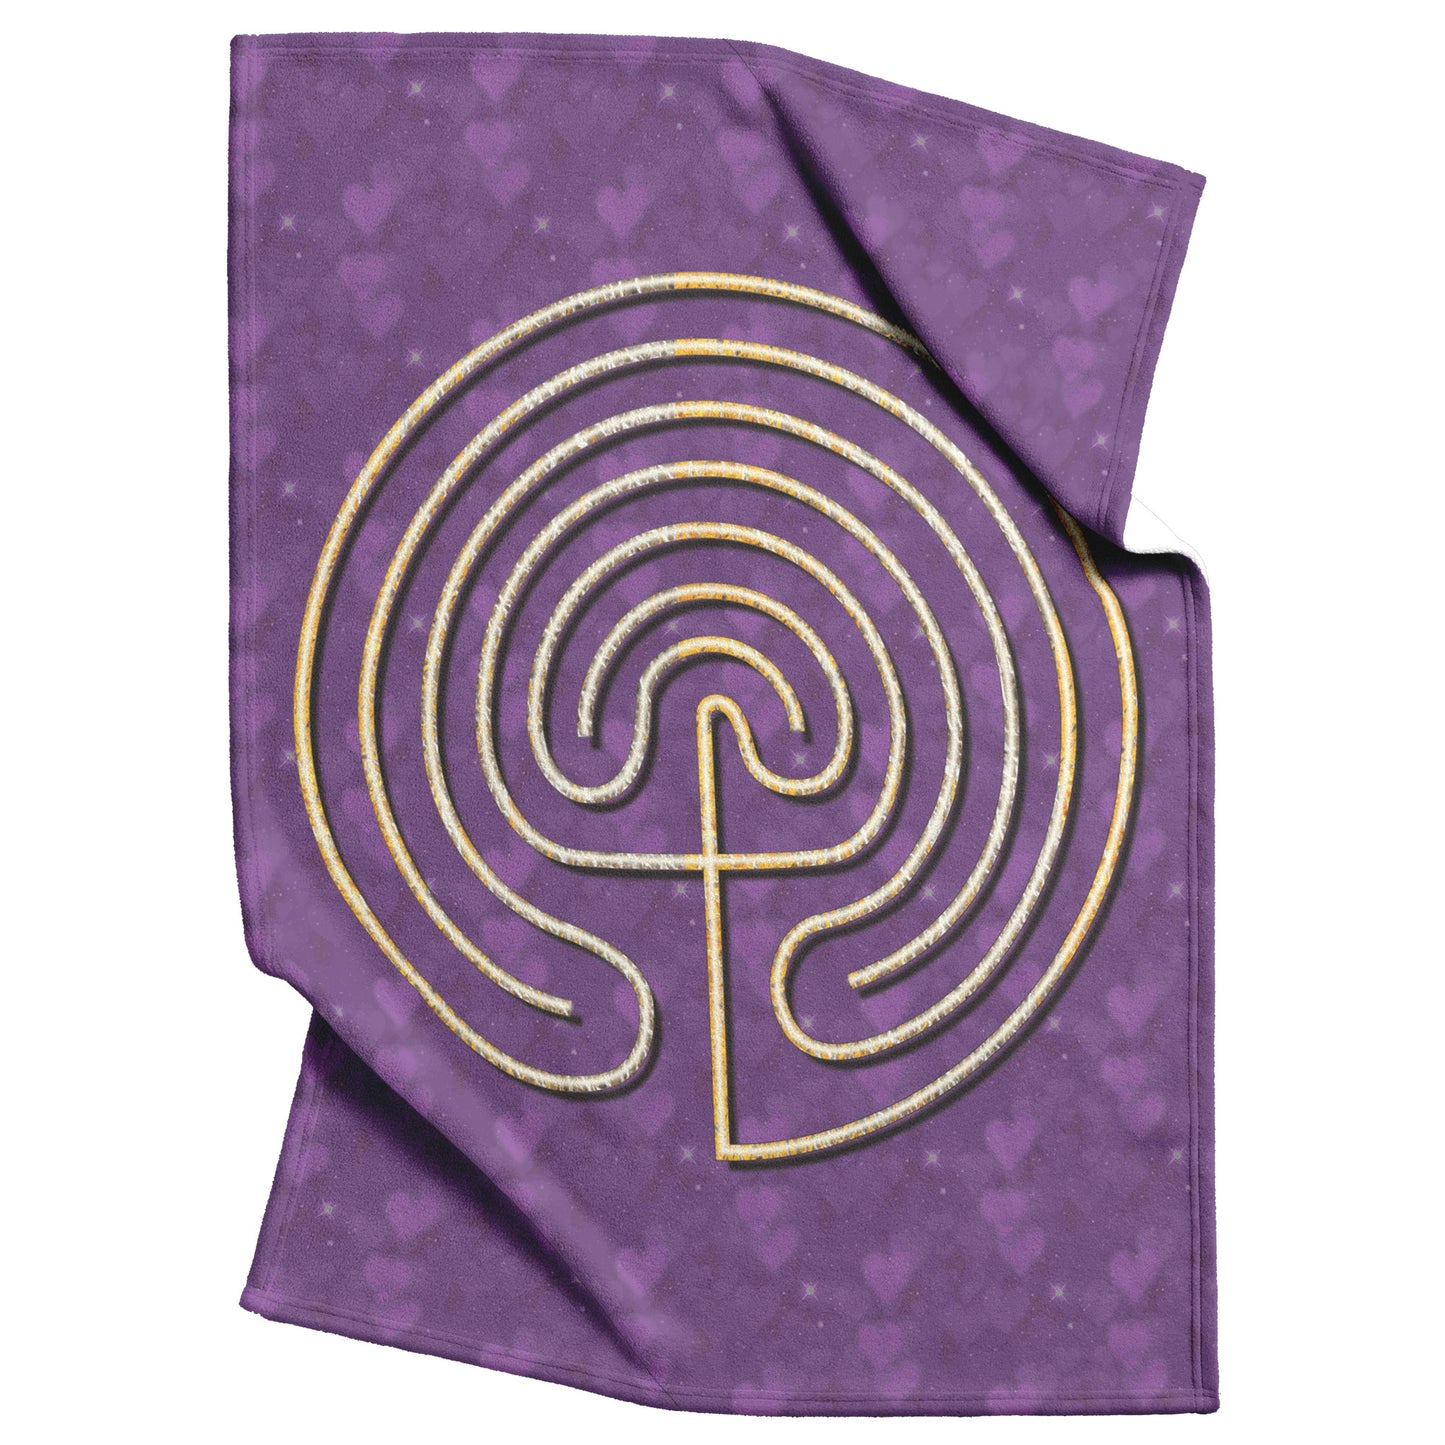 Cretian Labyrinth Therapy Blanket - Purple